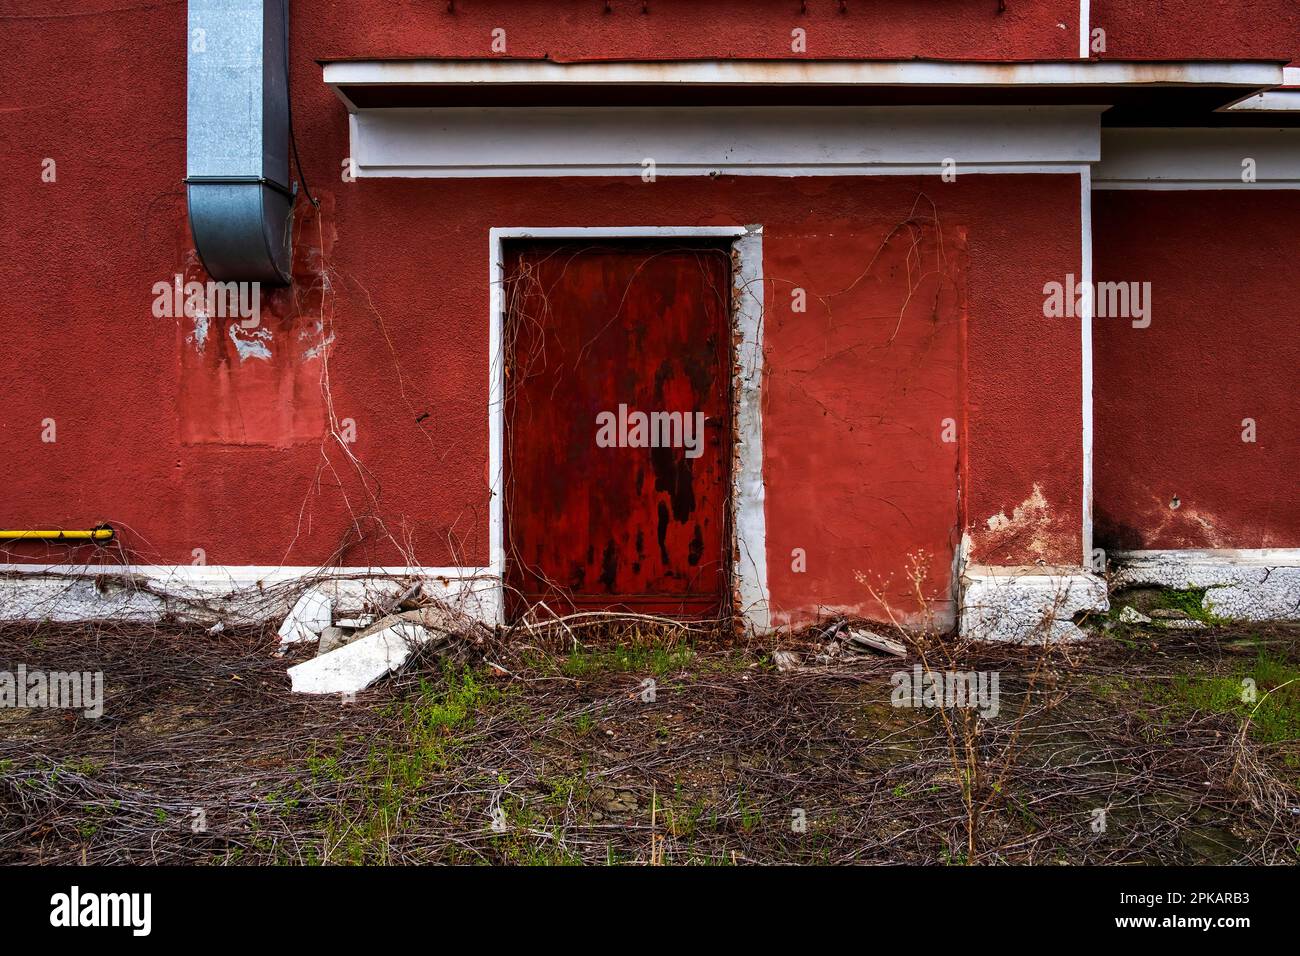 Exterior facade of a red building in Bucharest, Romania Stock Photo